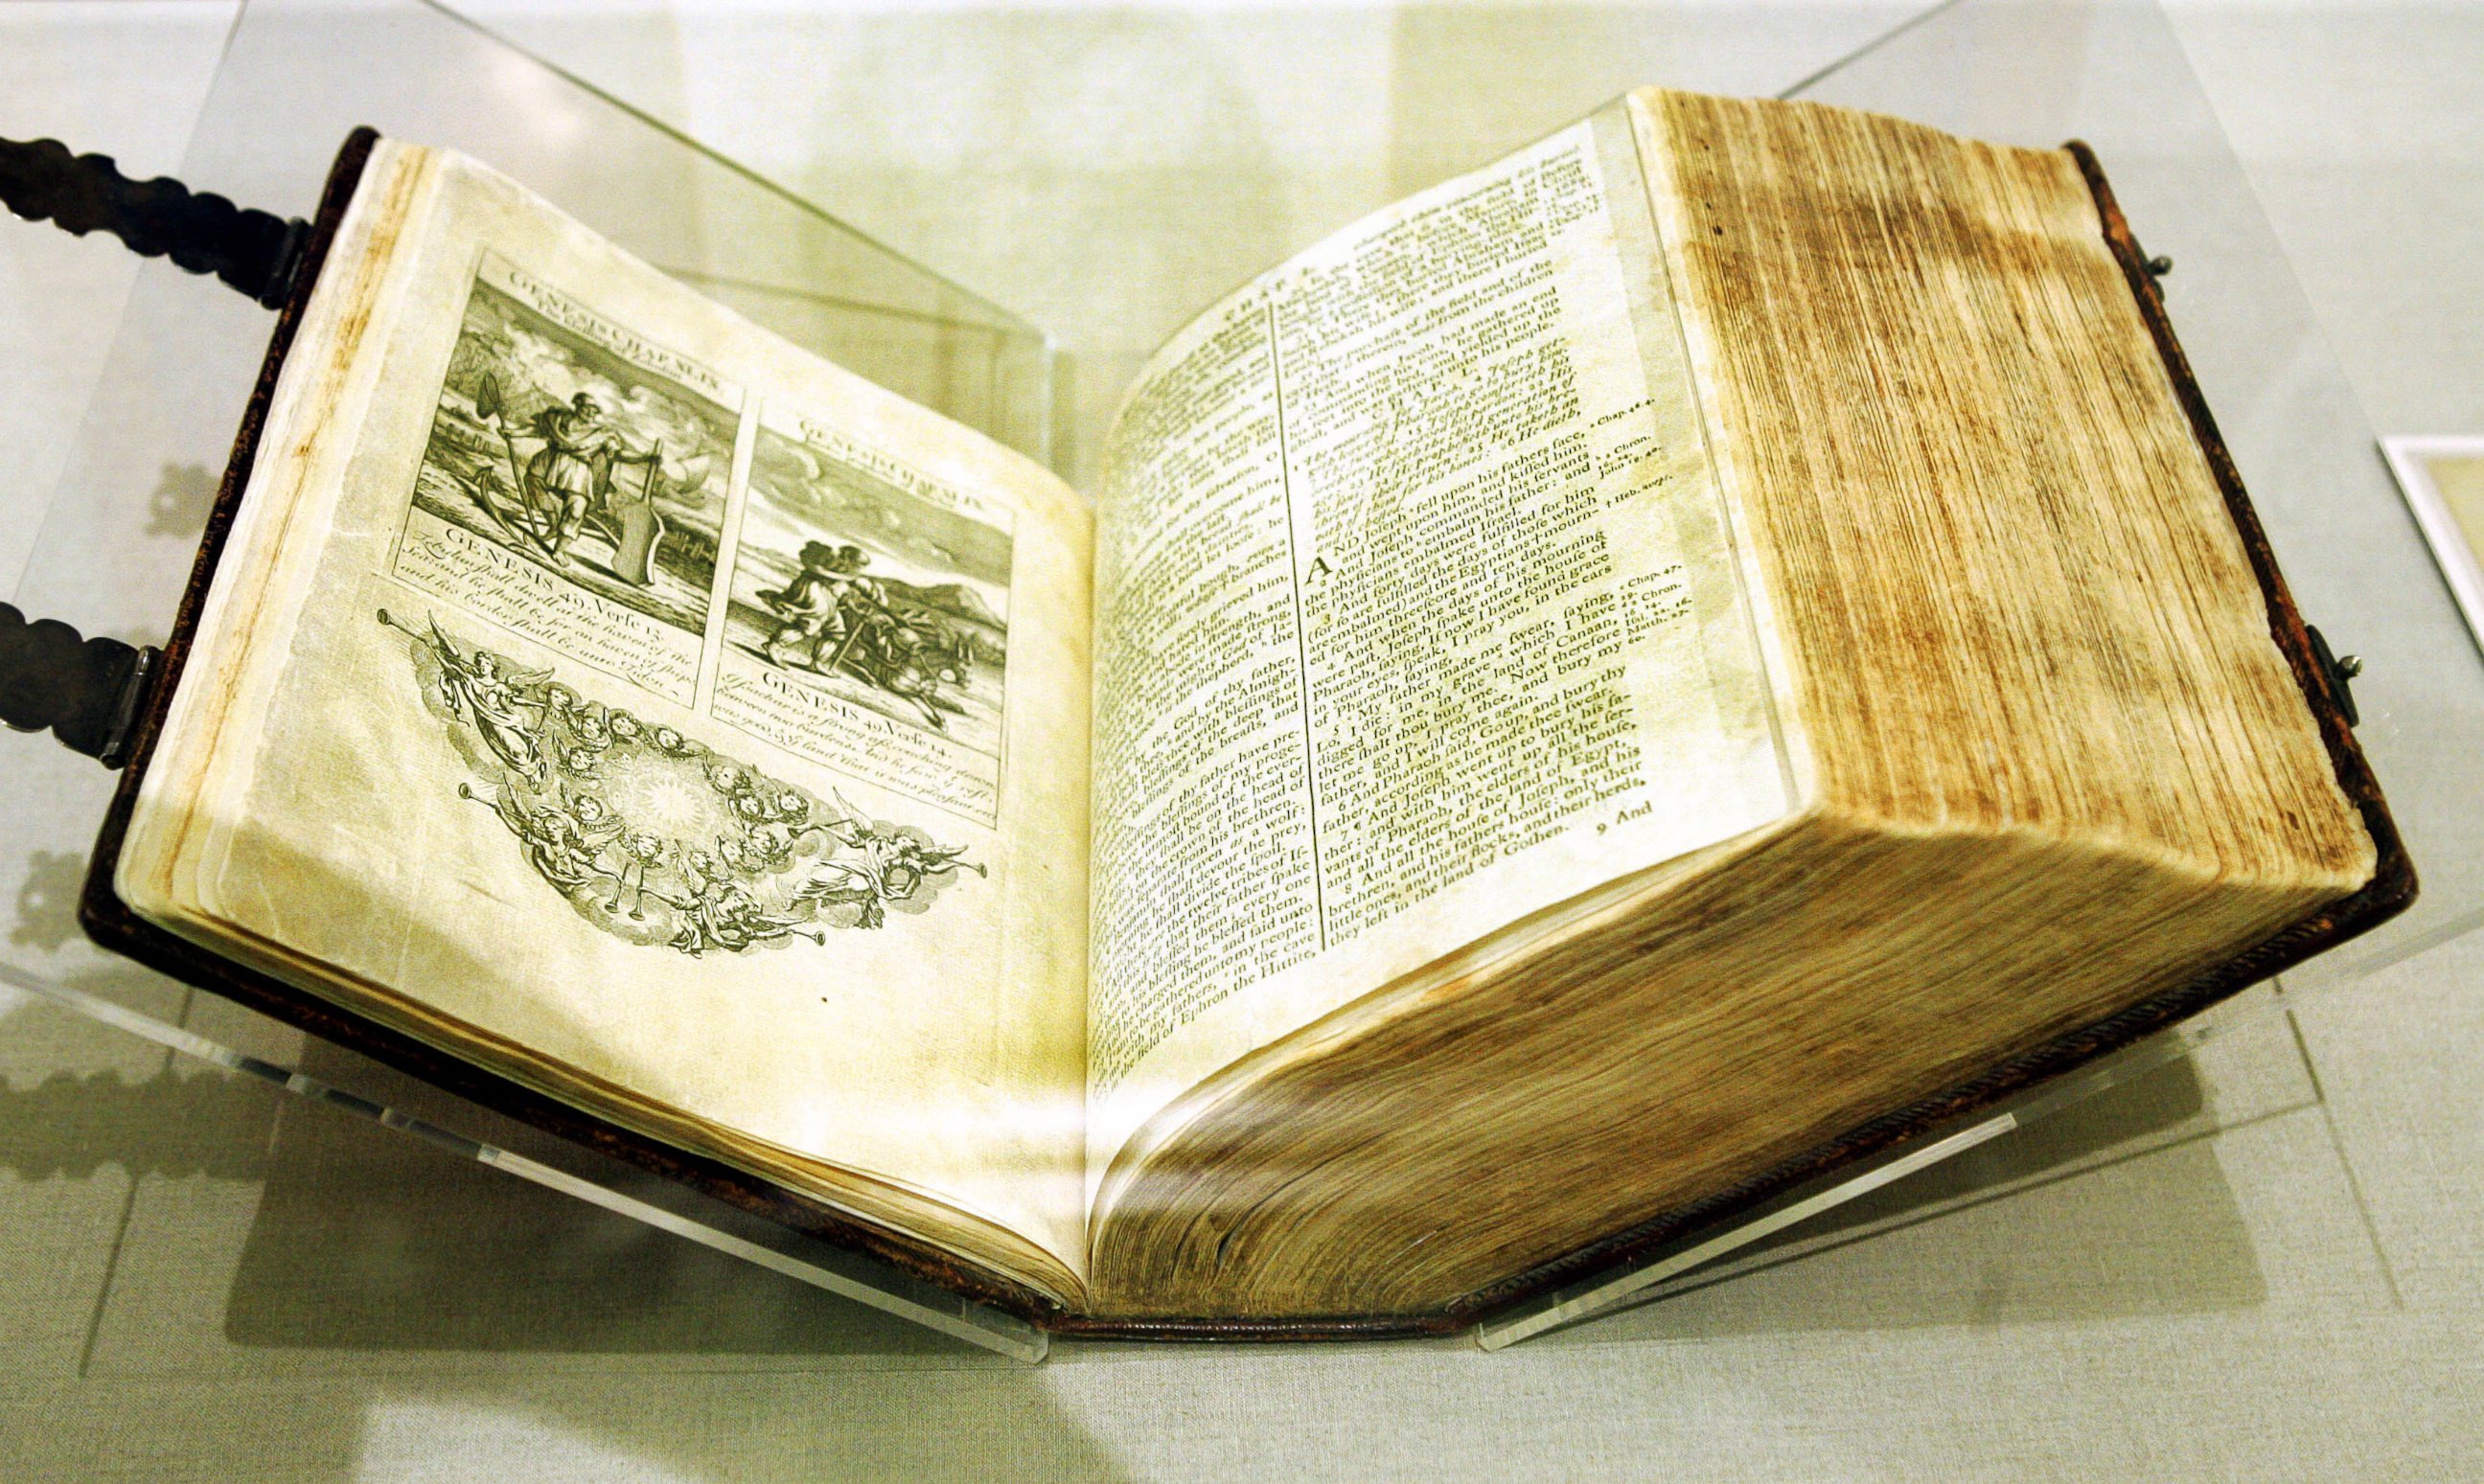 PHOTO: The Bible used by George Washington, when he took the oath of office as president of the United States, on April 30, 1789, is displayed in the National Archives, on Jan. 10, 2005 in Washington.